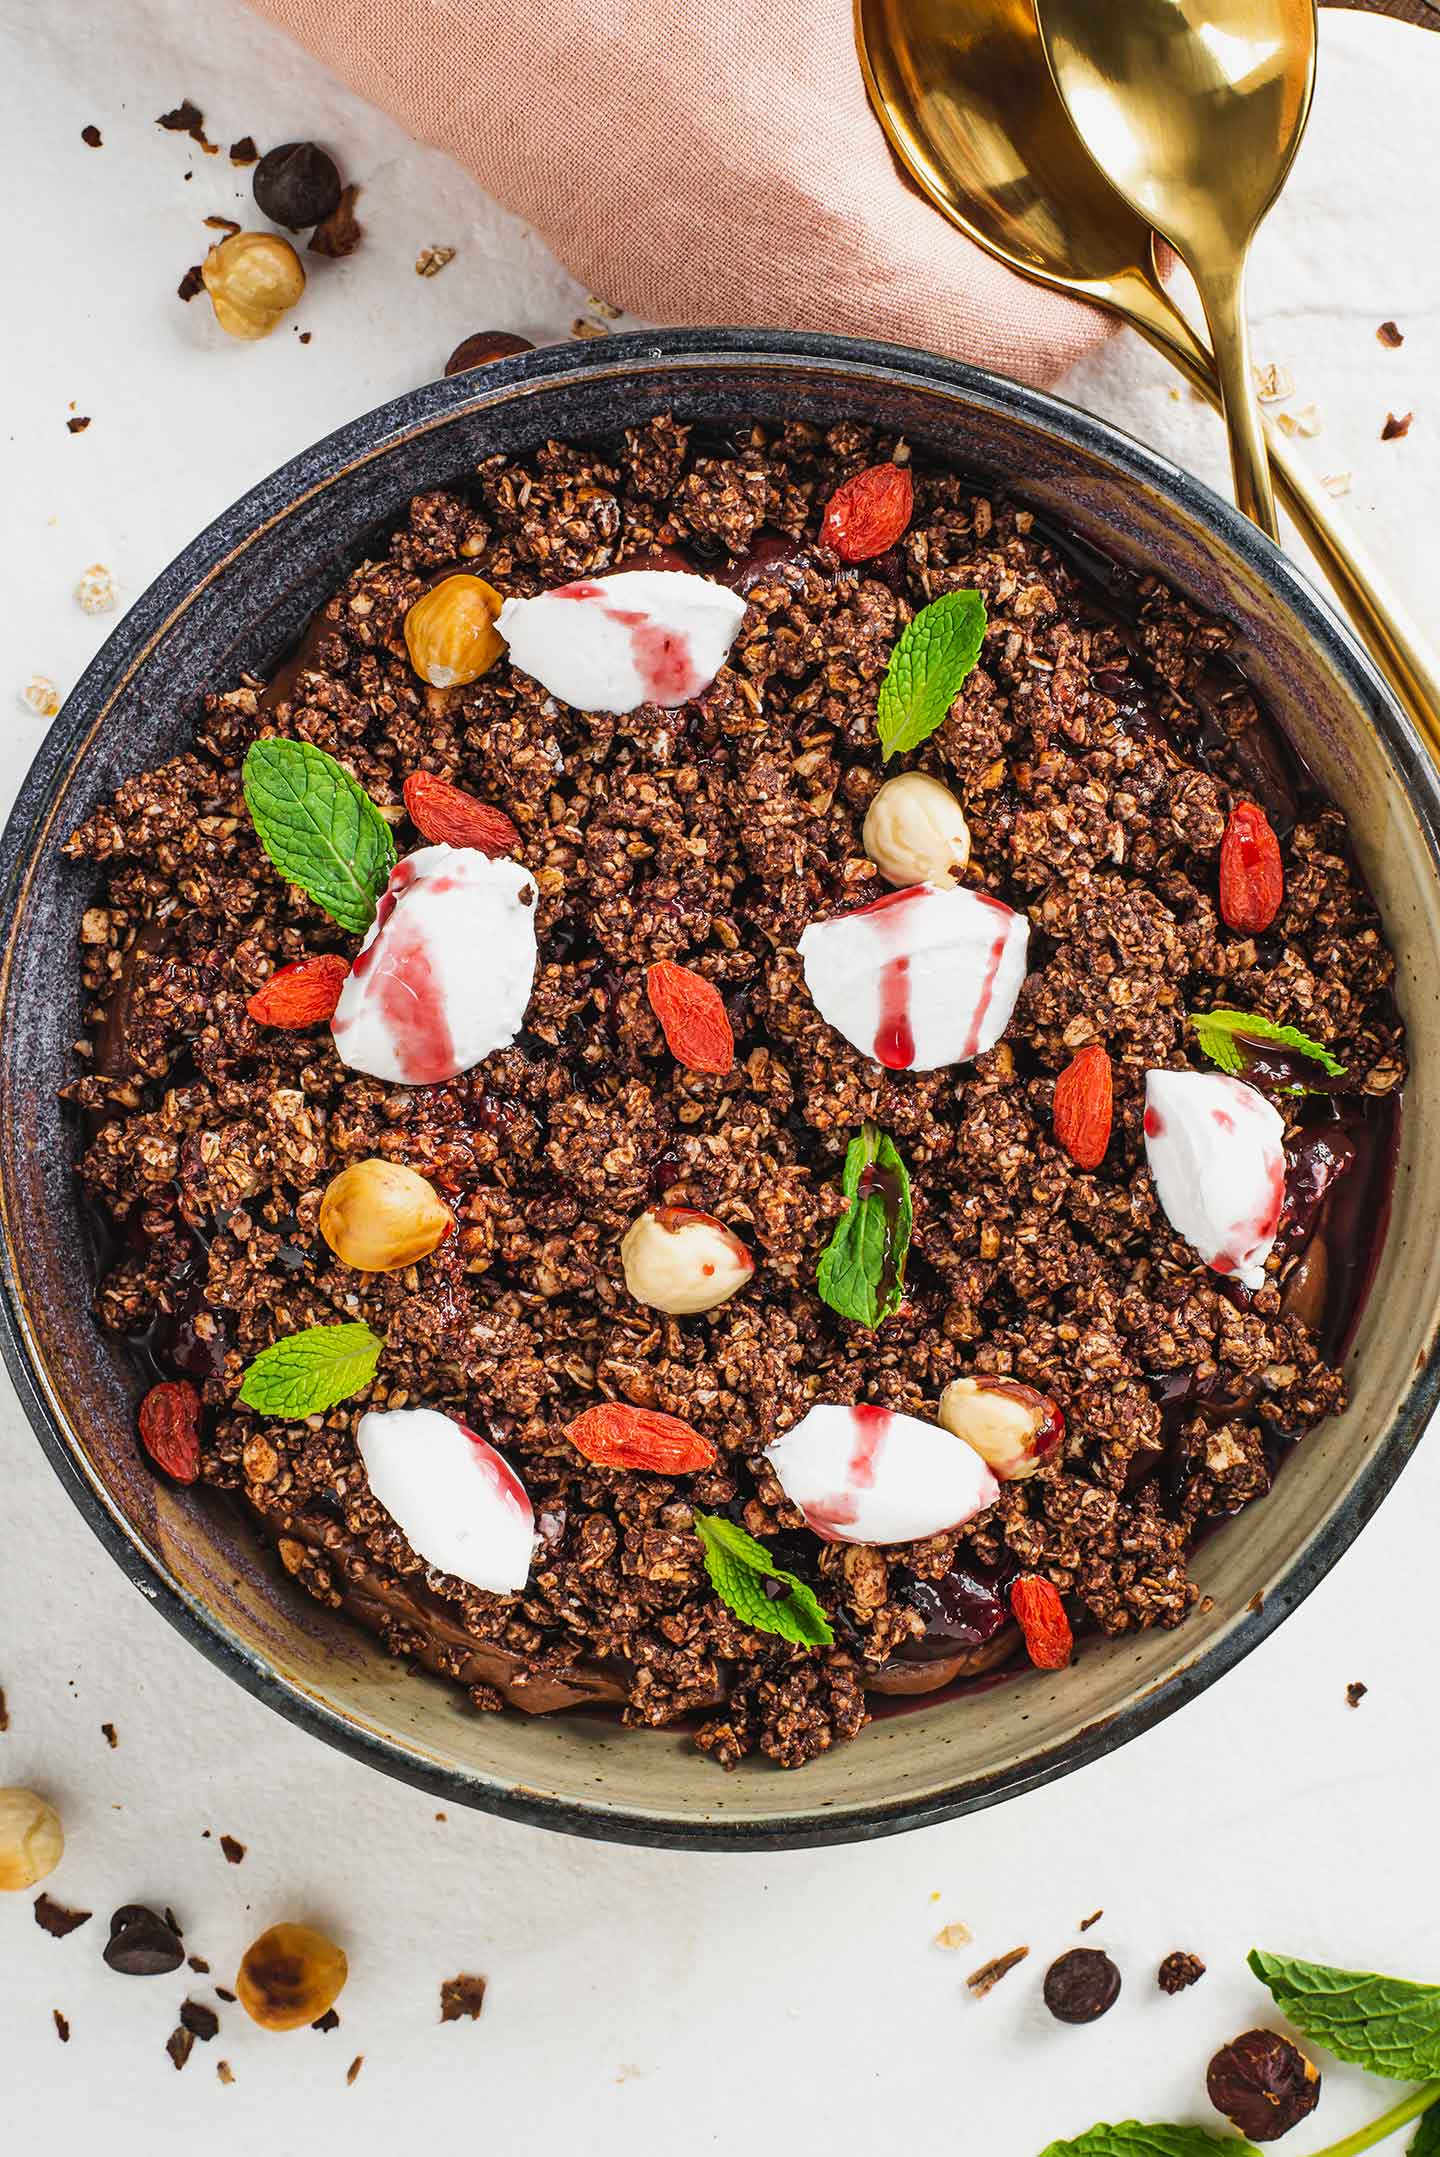 Top down view of a chocolate mousse terrarium. The top of the dessert is covered in an oat and nut crumble, dollops of whipped cream, dried goji berries, and mint leaves.